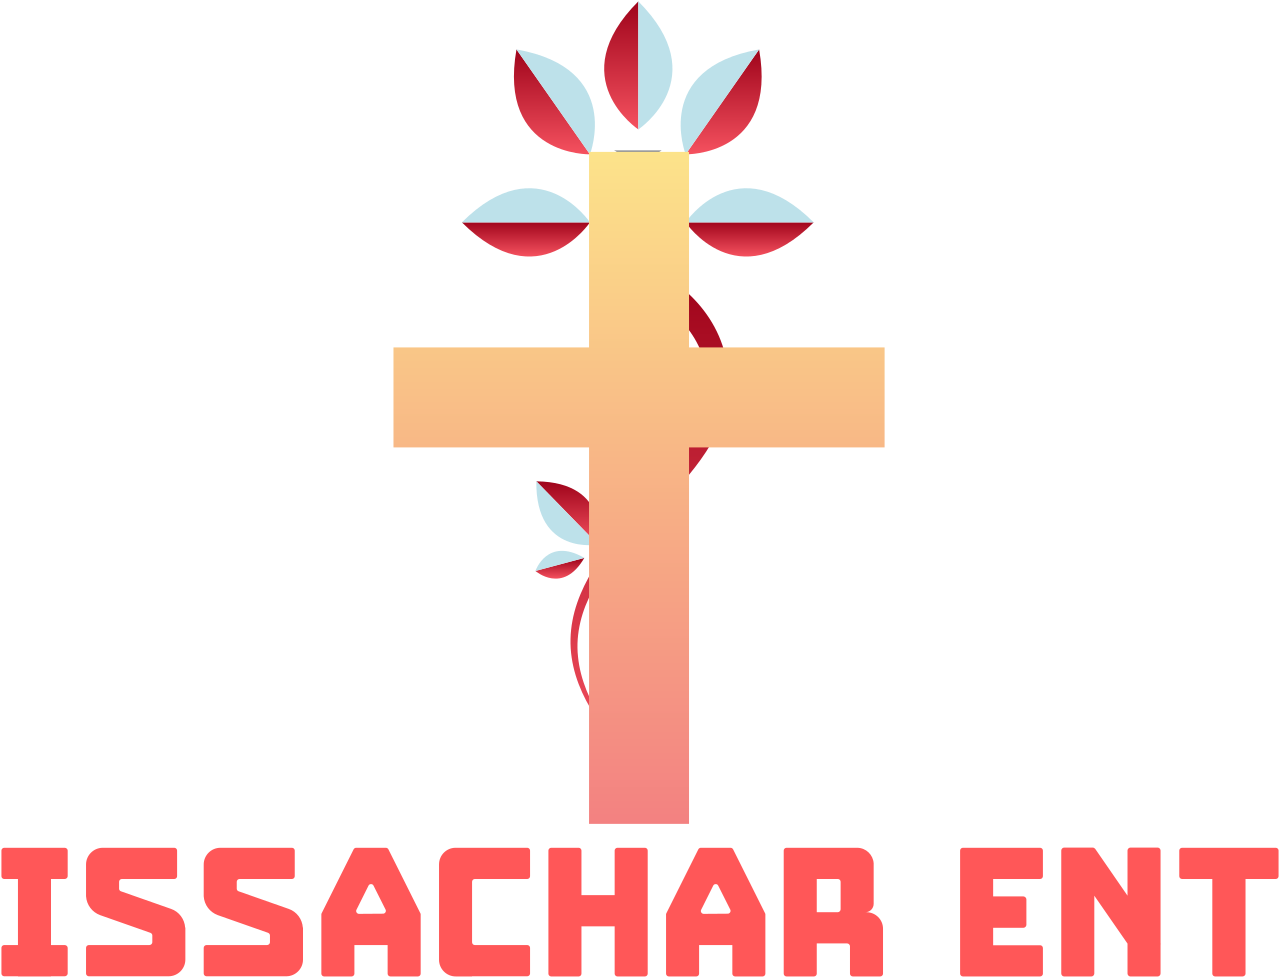 Issachar ENT's web page